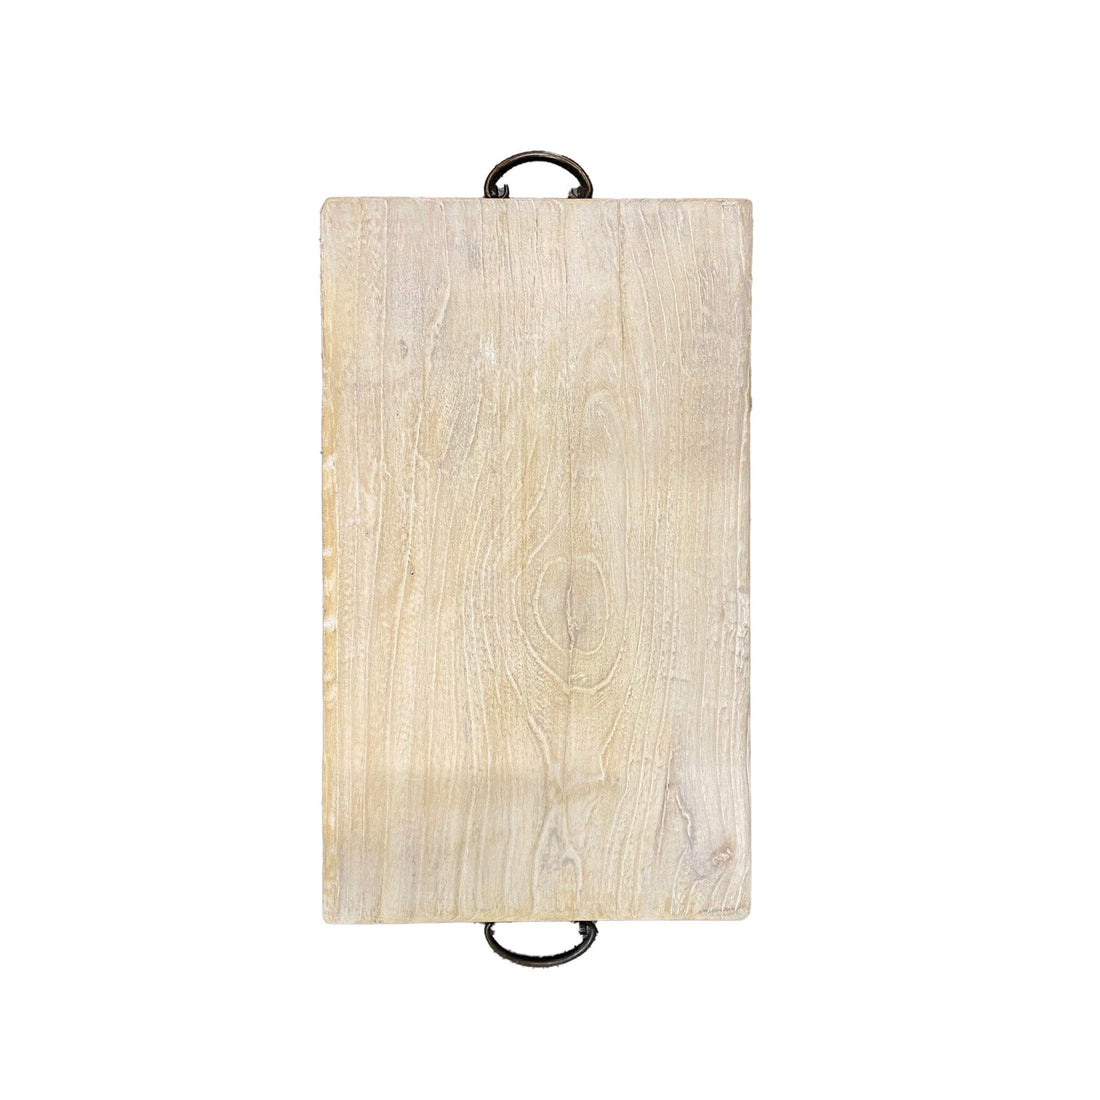 Timber Rectangle Tray with Handles Homewares Beachwood Designs 